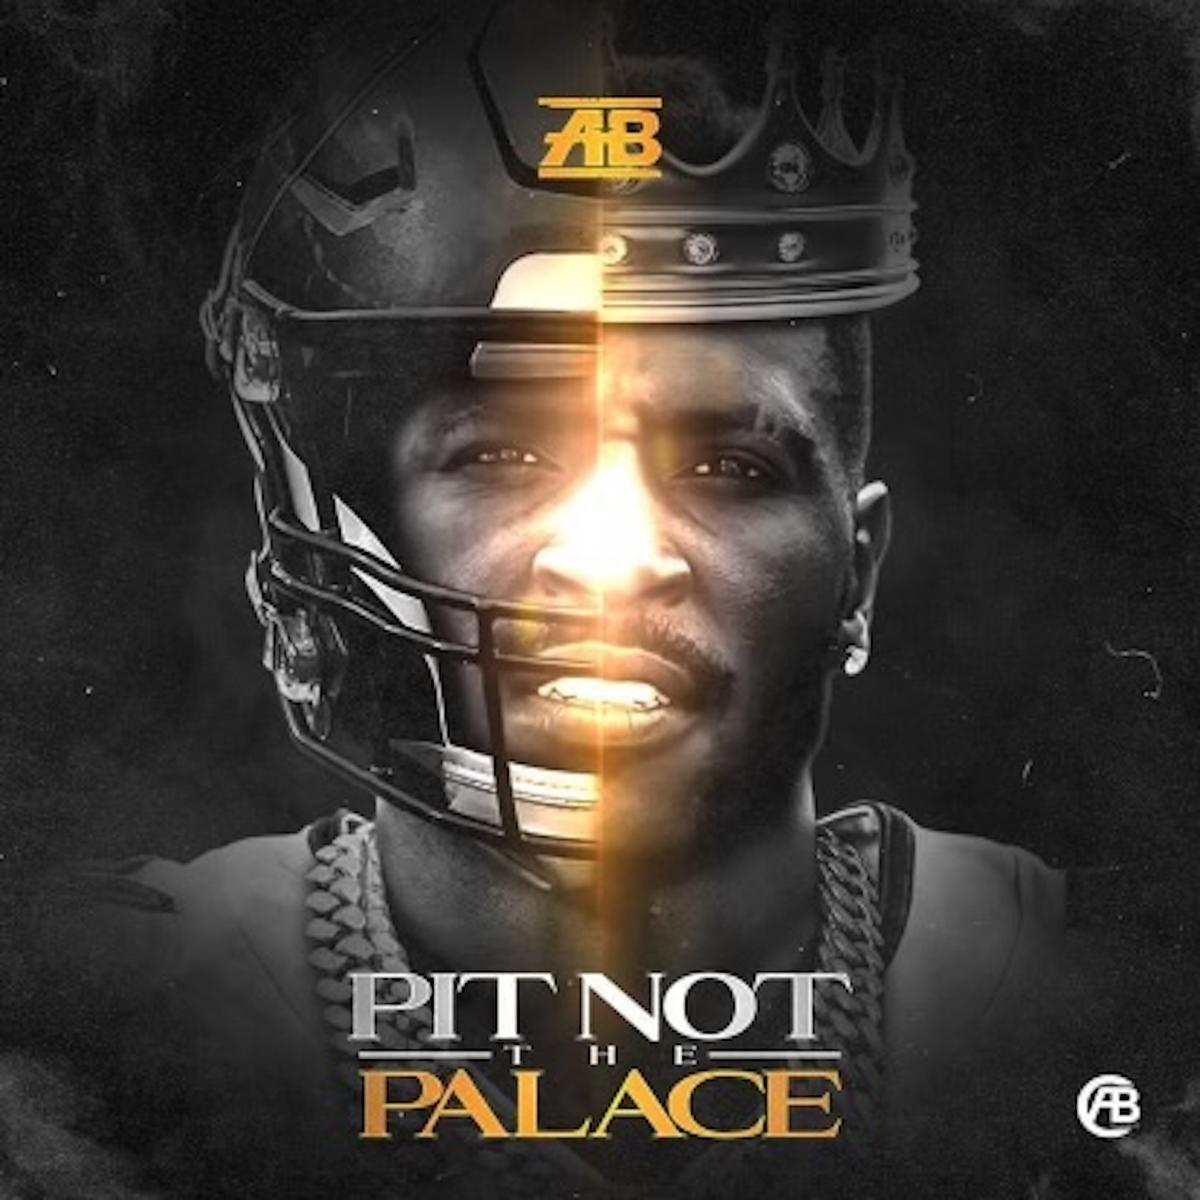 antonio brown pit not the palace